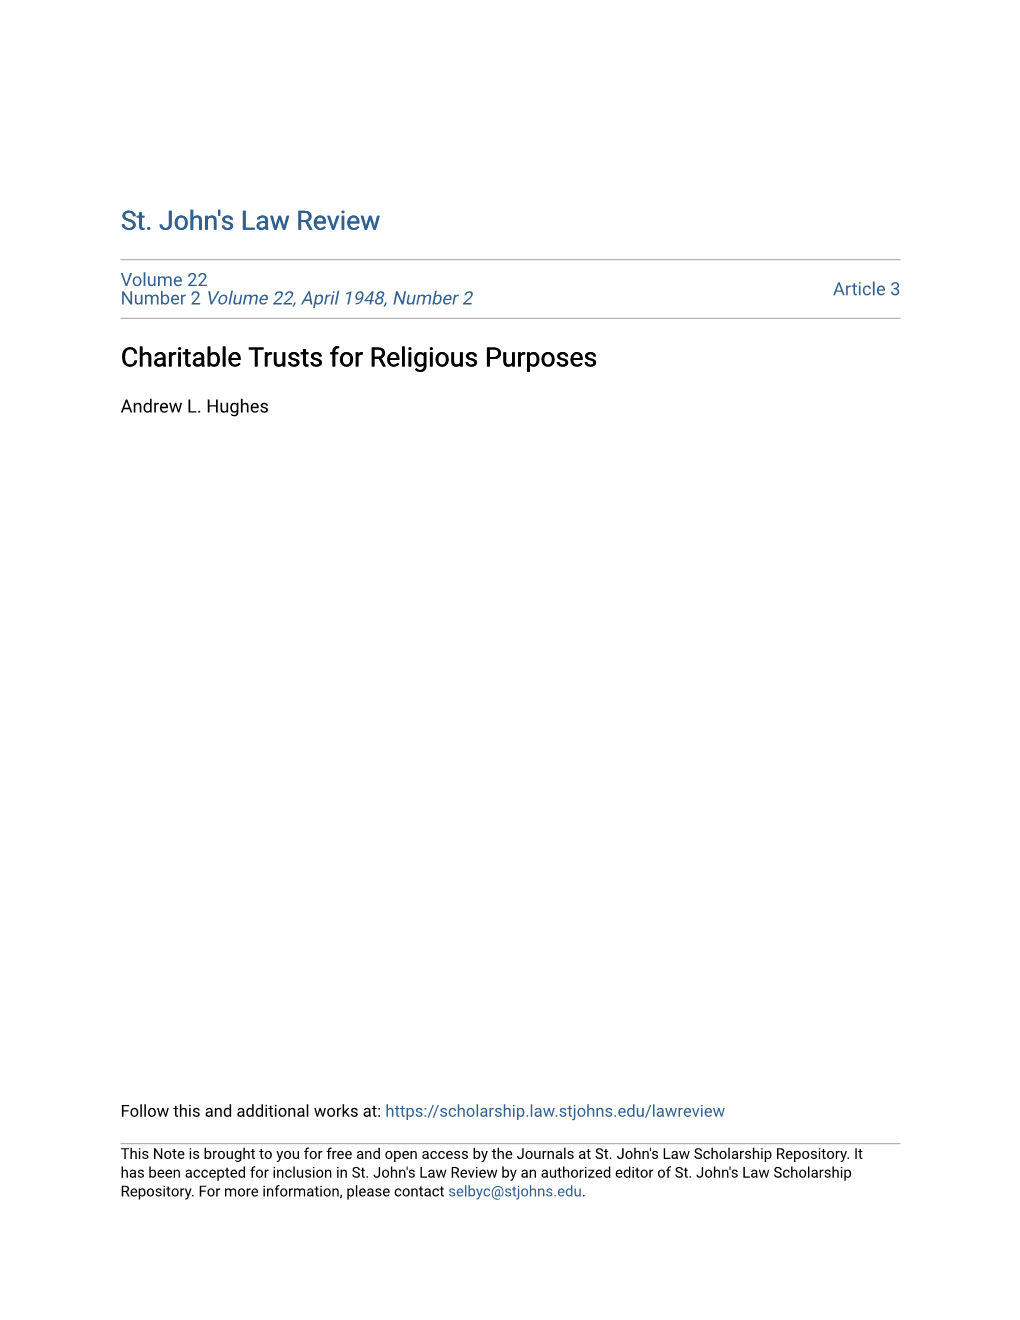 Charitable Trusts for Religious Purposes